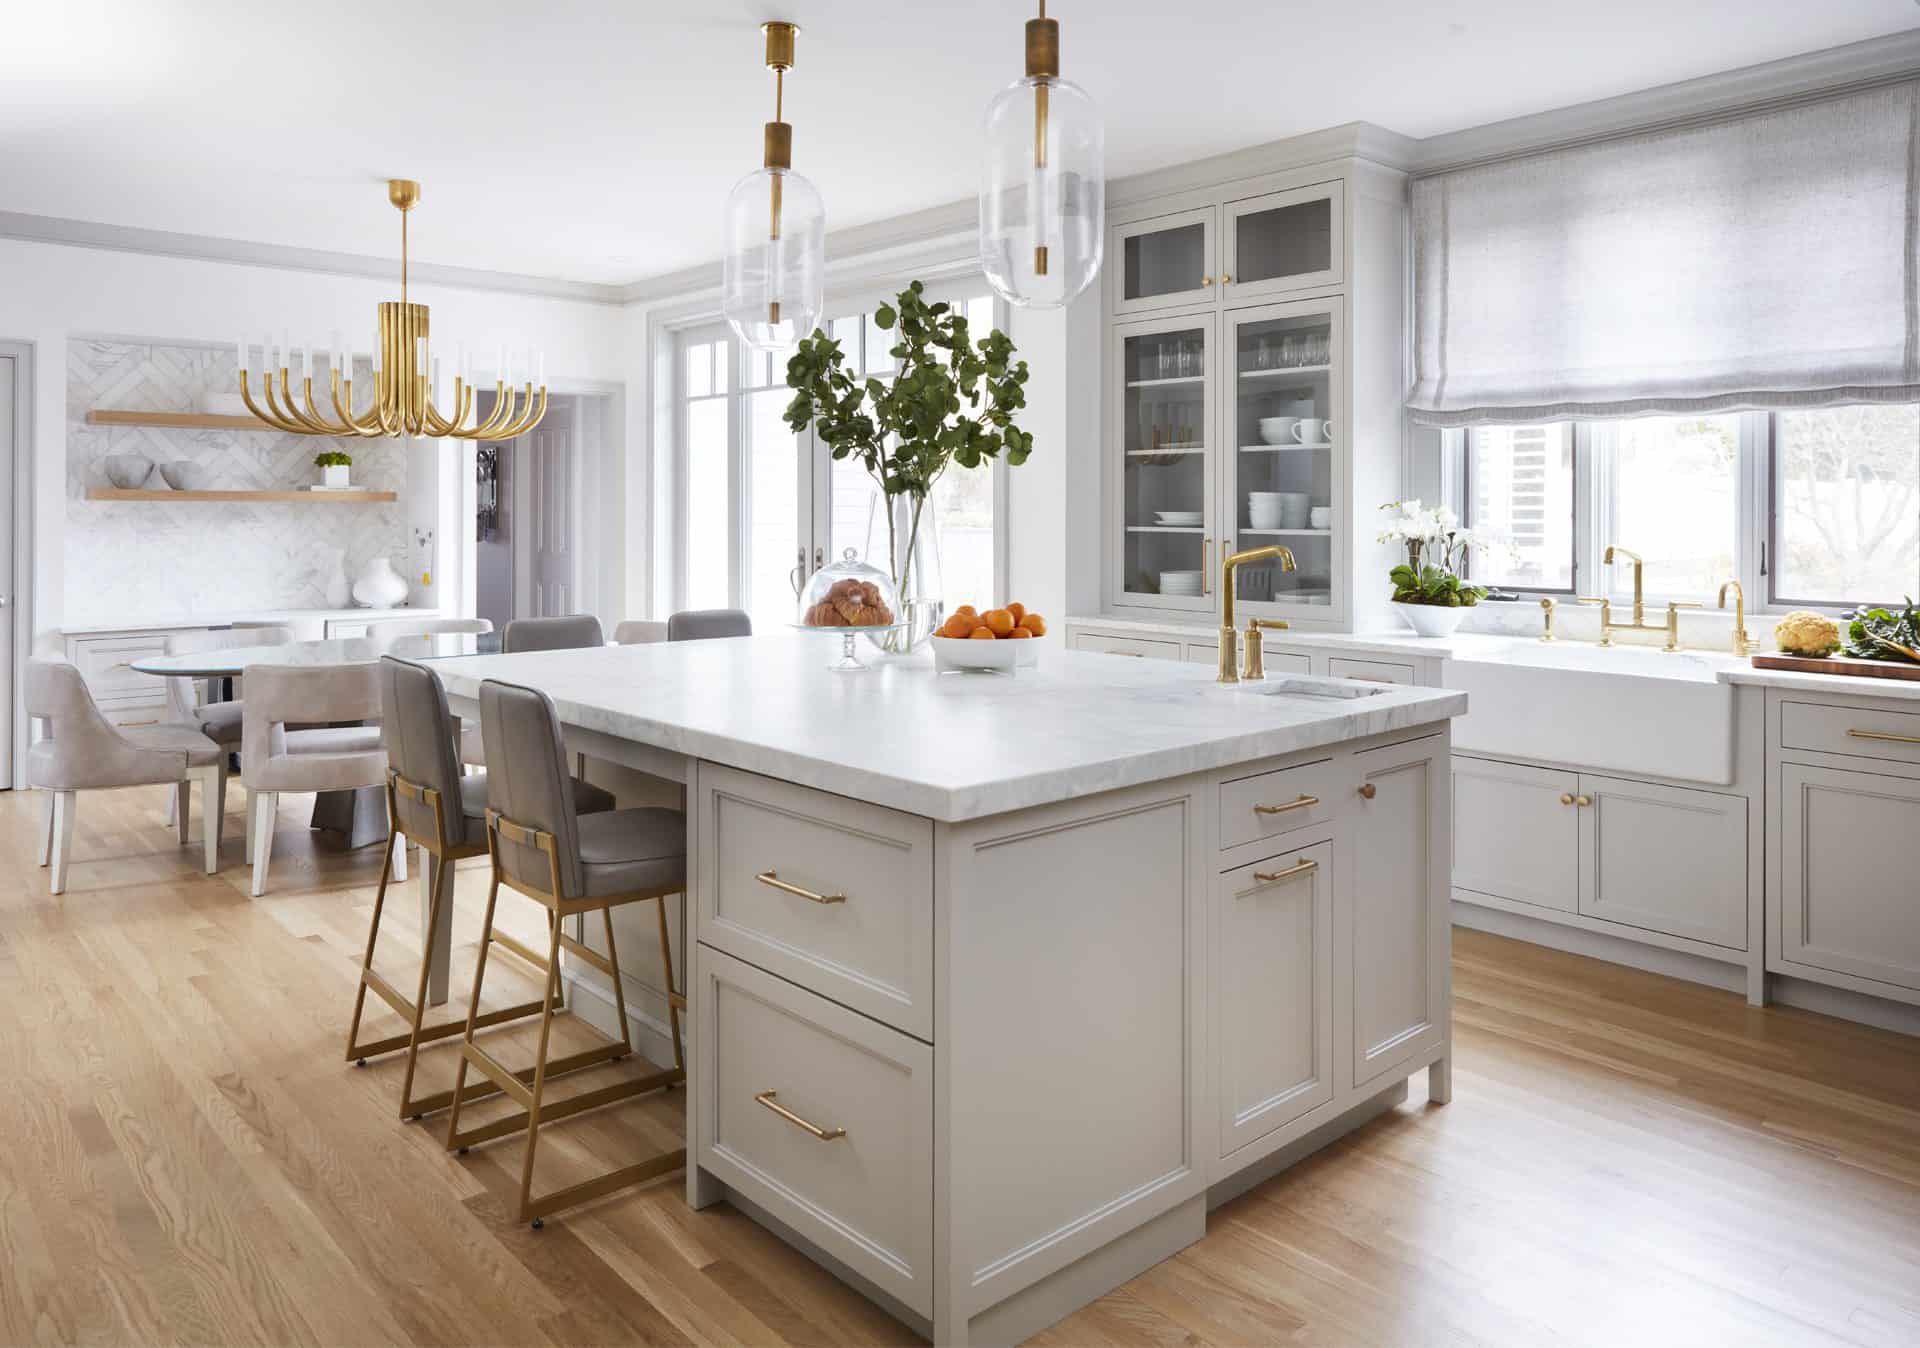 Kitchen and dining with Bilotta Collection cabinetry with brass hardware, with marble island and counter tops and herringbone marble backsplash